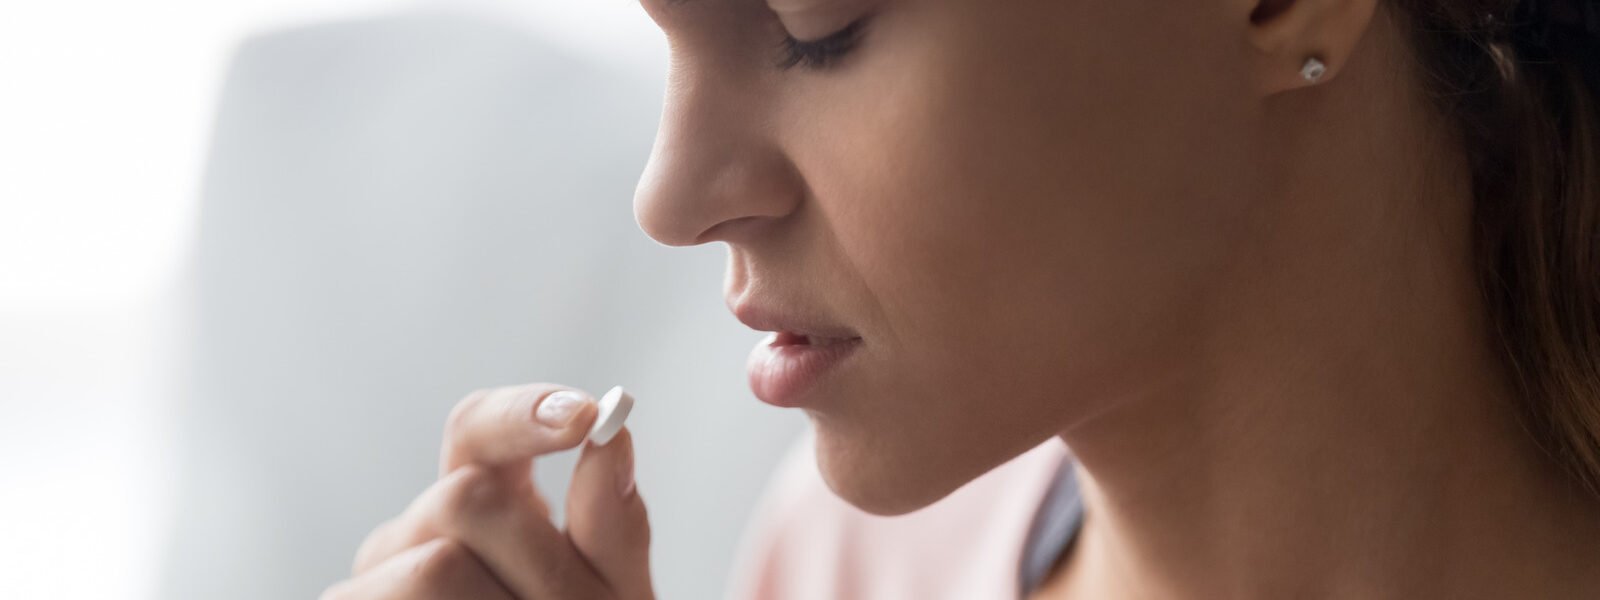 Taking Ibuprofen Might Be A Bad Idea If You Have This Common Medical Condition - Health Digest